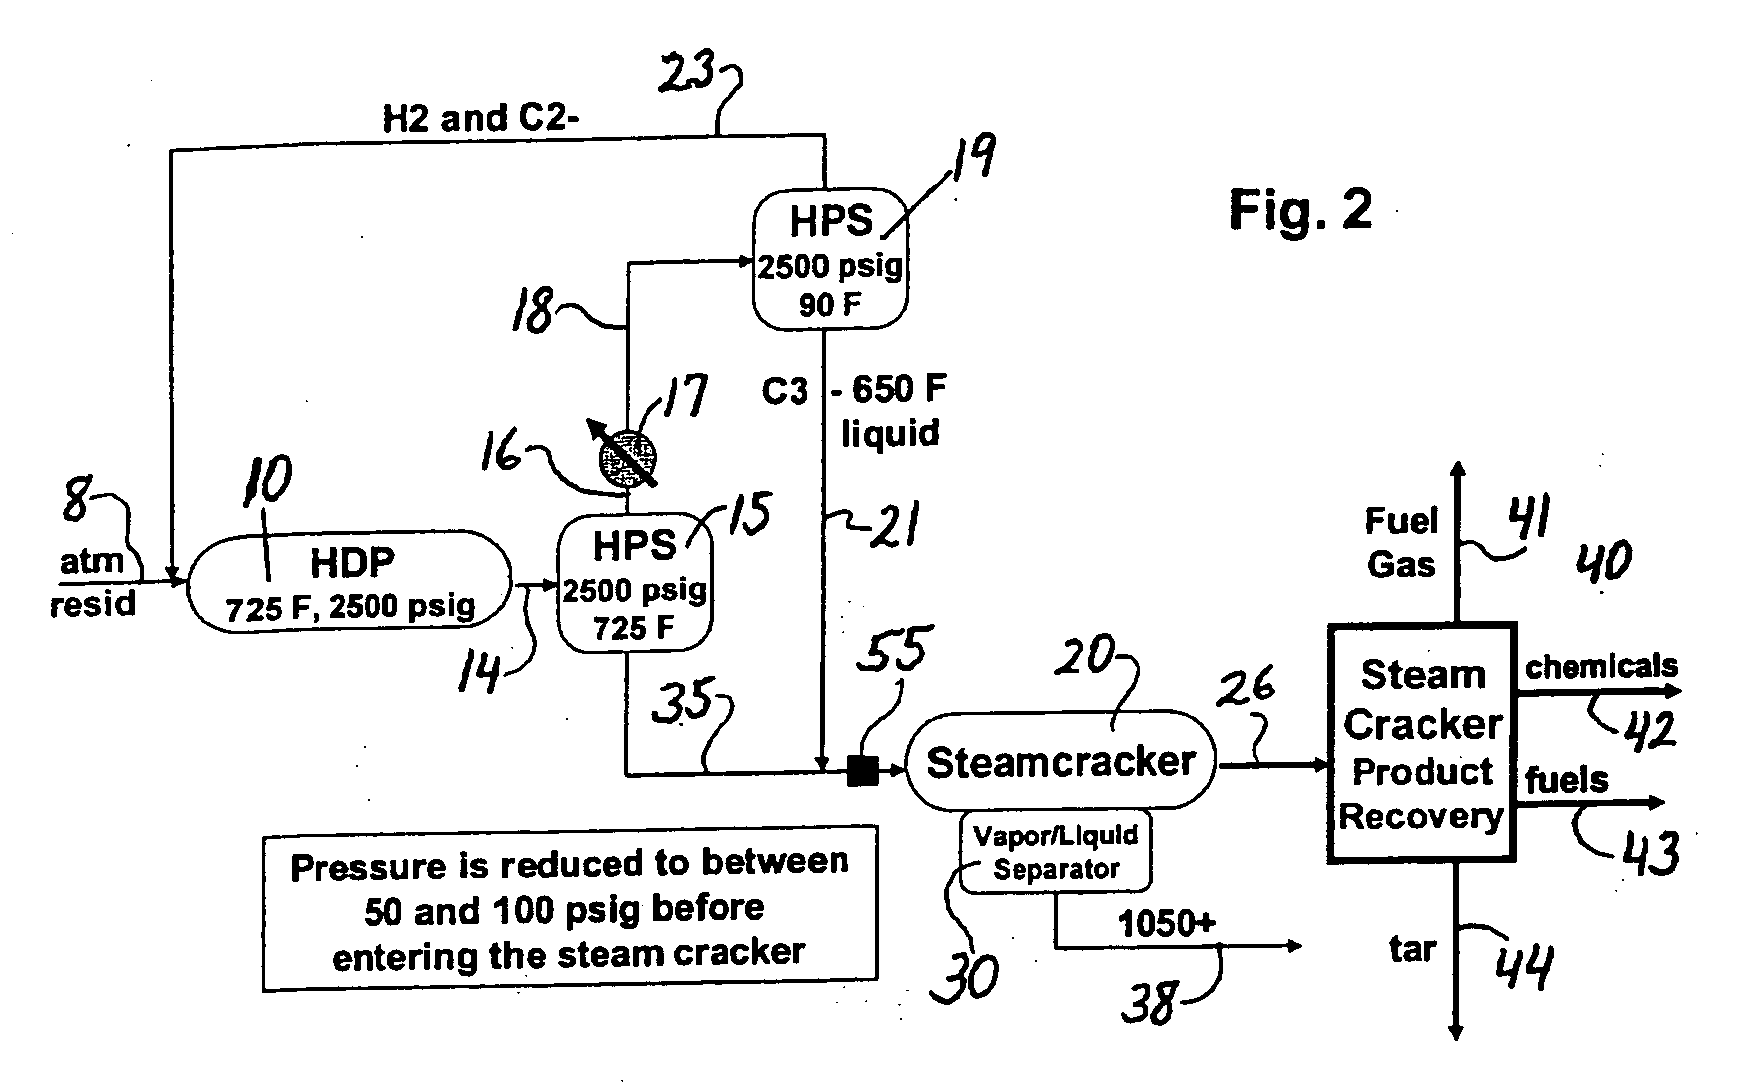 Resid processing for steam cracker feed and catalytic cracking